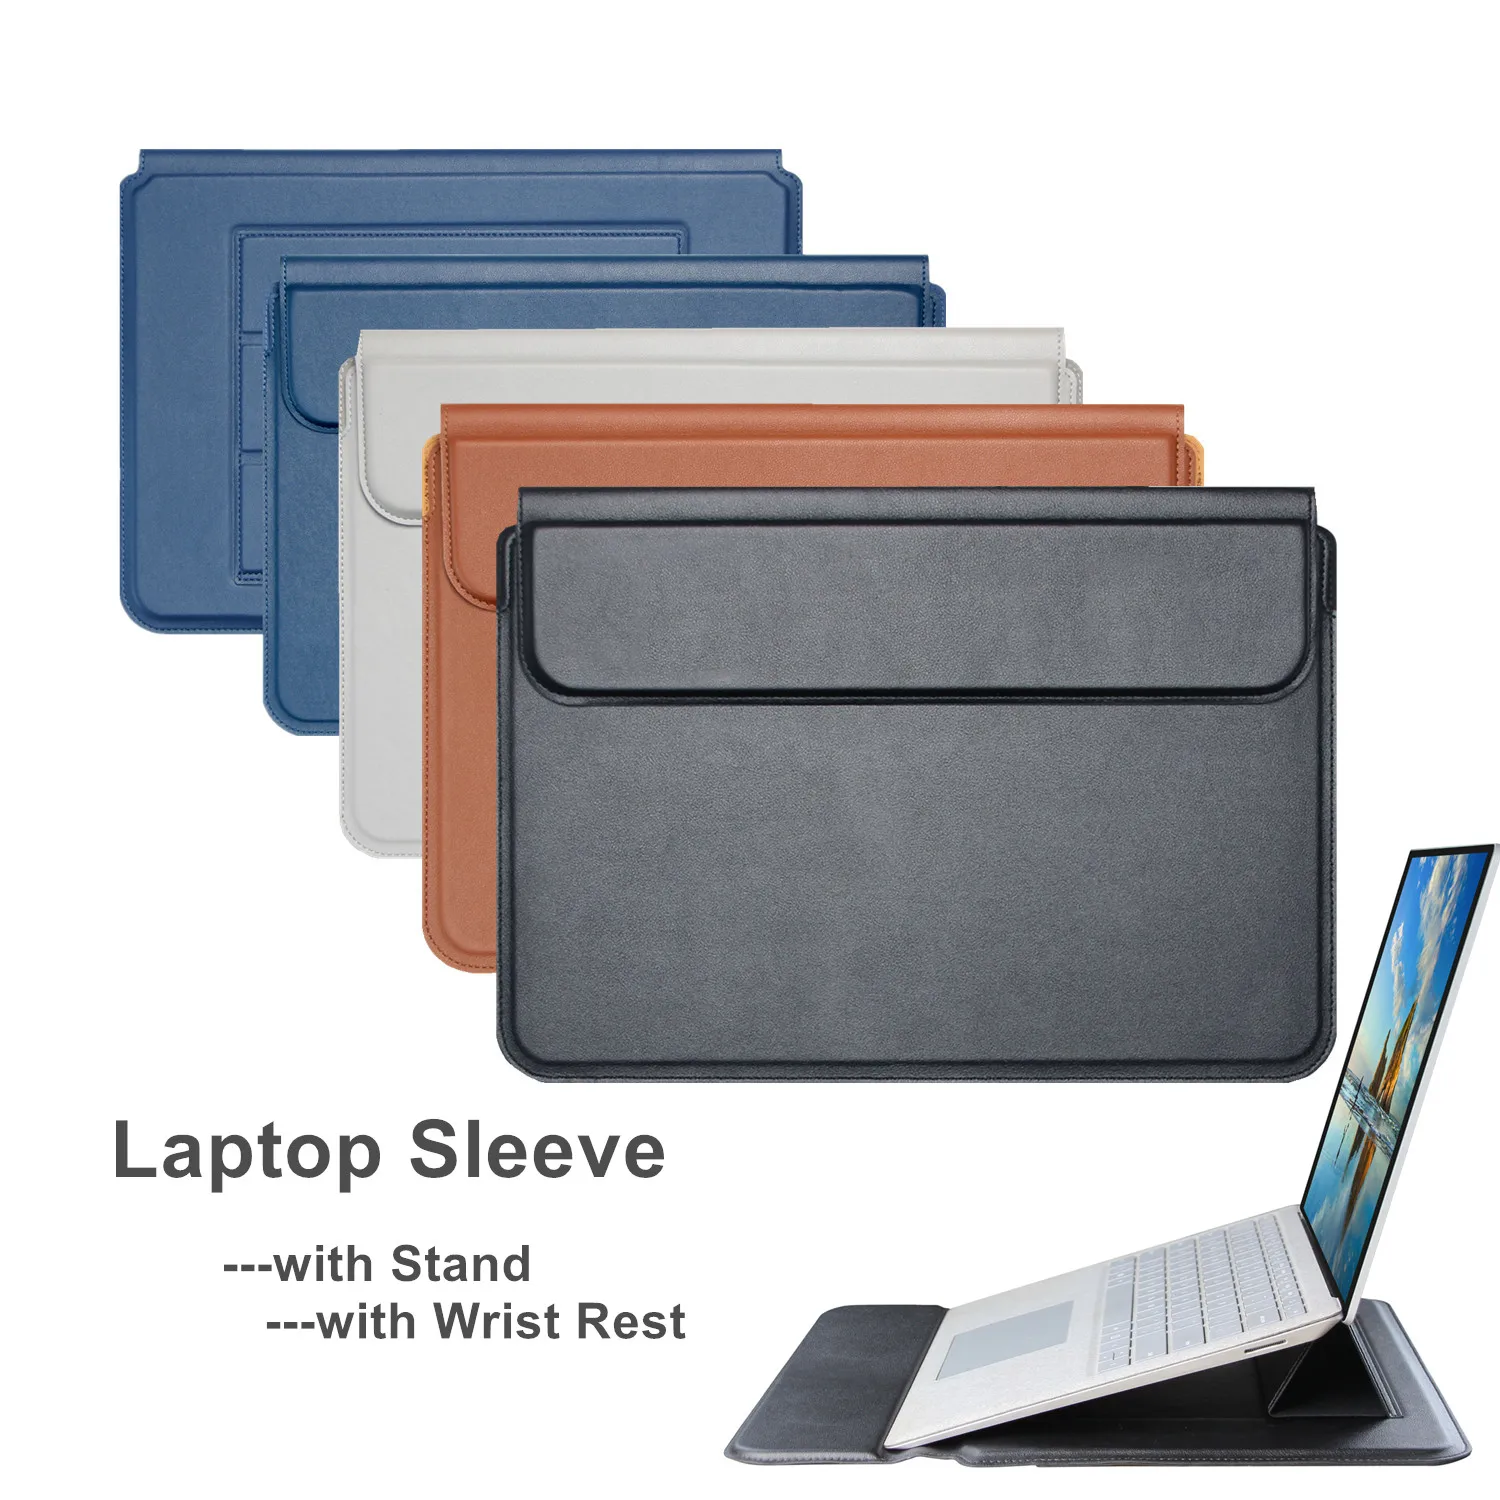 

Laptop Sleeve Case 13" with Laptop Stand for MacBook Air/Pro 13.3" Microsoft Surface Laptop 13.5" 13" Carry Travel Cover Case